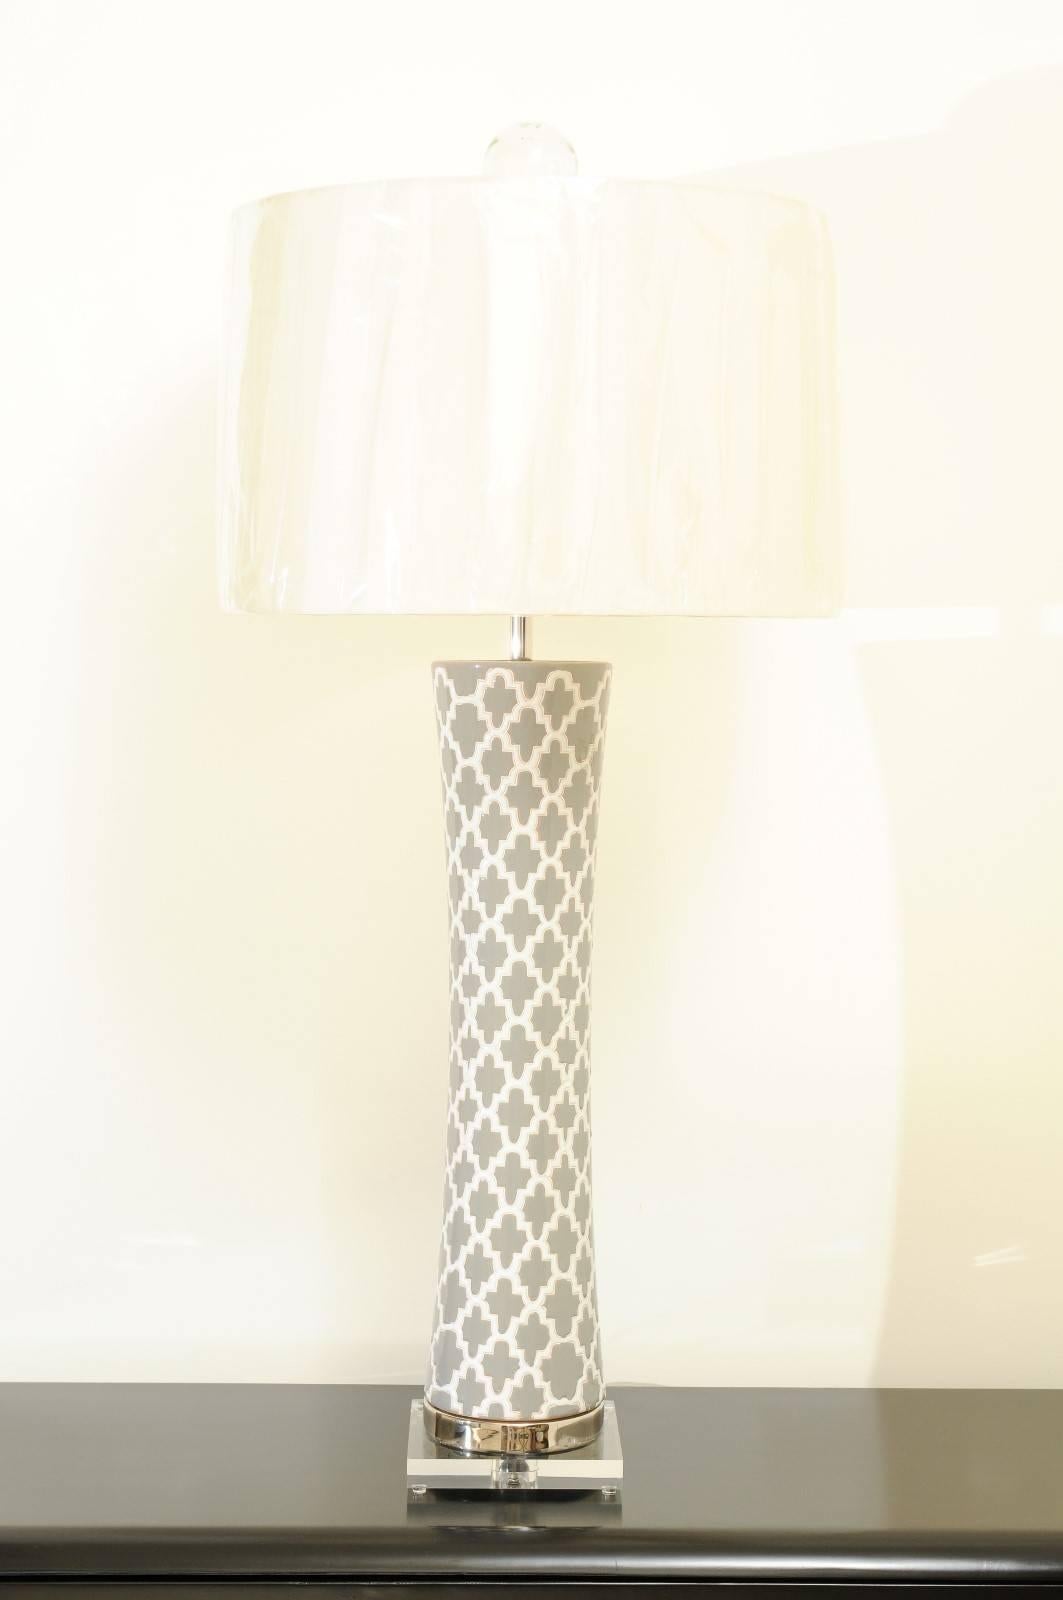 An exquisite pair of large-scale hand-painted ceramic vessels as custom-made lamps. Tall, elegant form with dramatic graphic motif; accents in polished nickel and Lucite. Custom-made clear blown glass finial ices the cake. Built using the finest